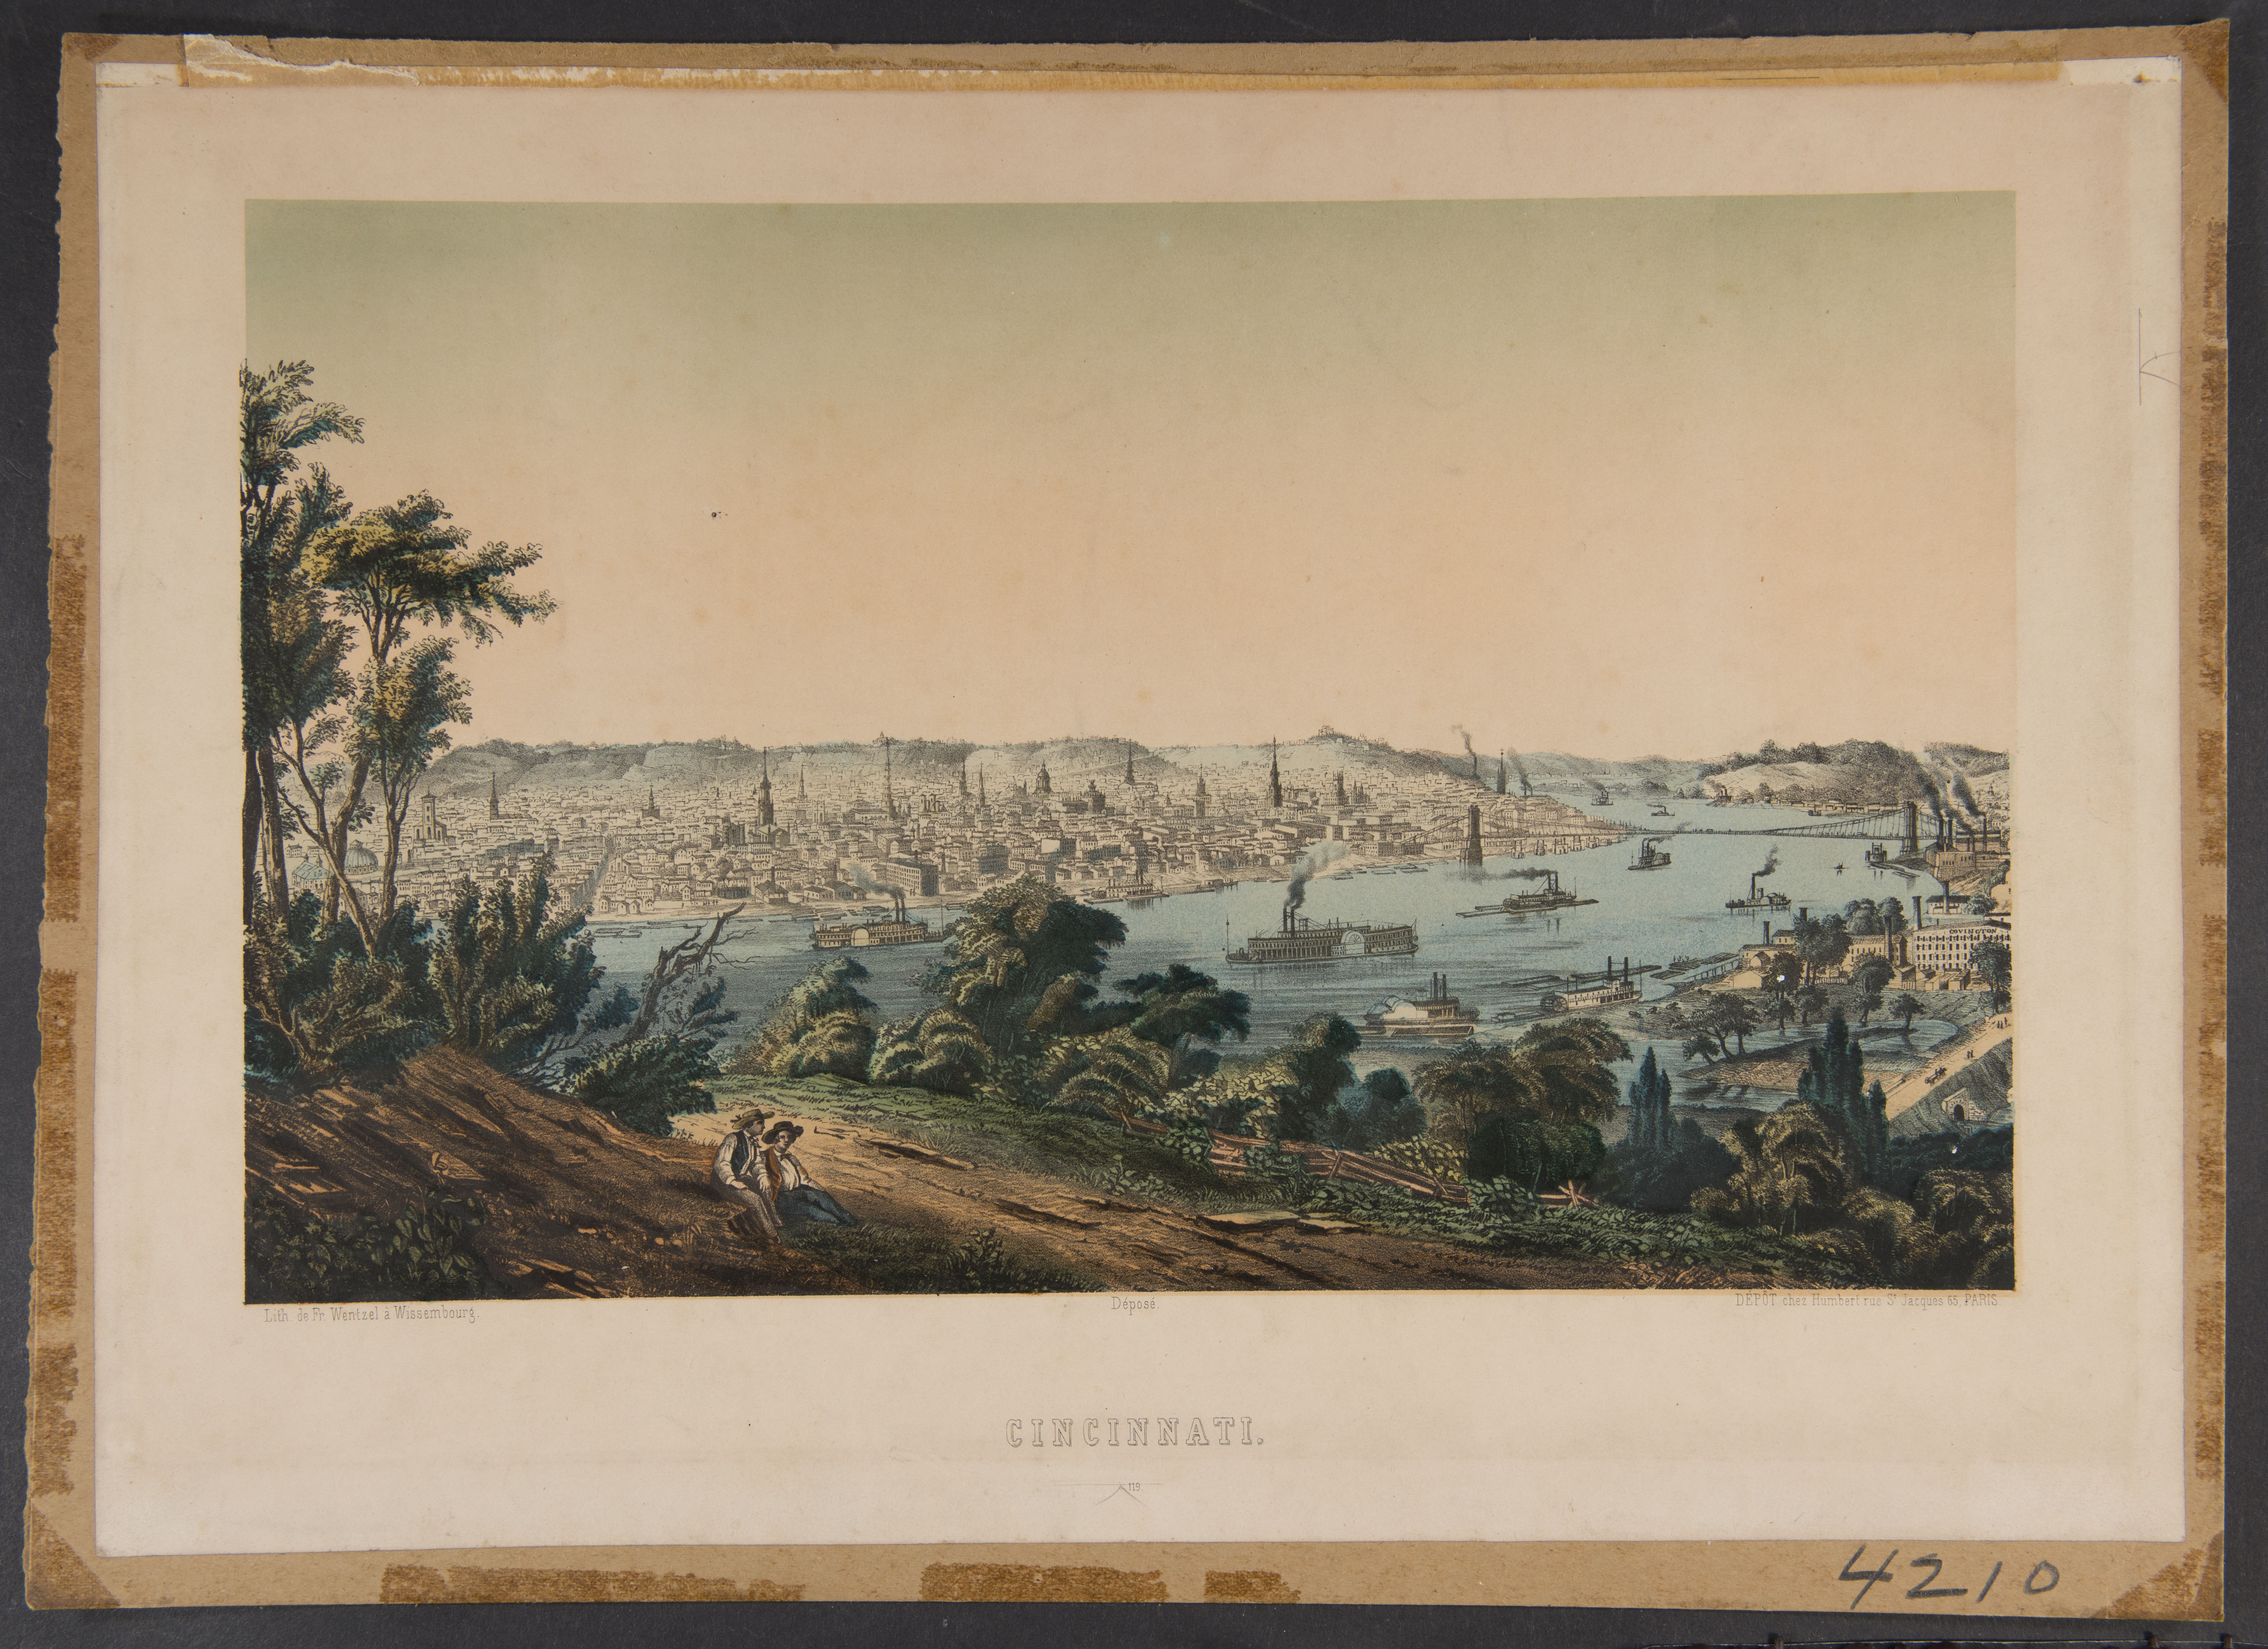 painting of the Cincinnati skyline and Ohio river seen from atop a hill